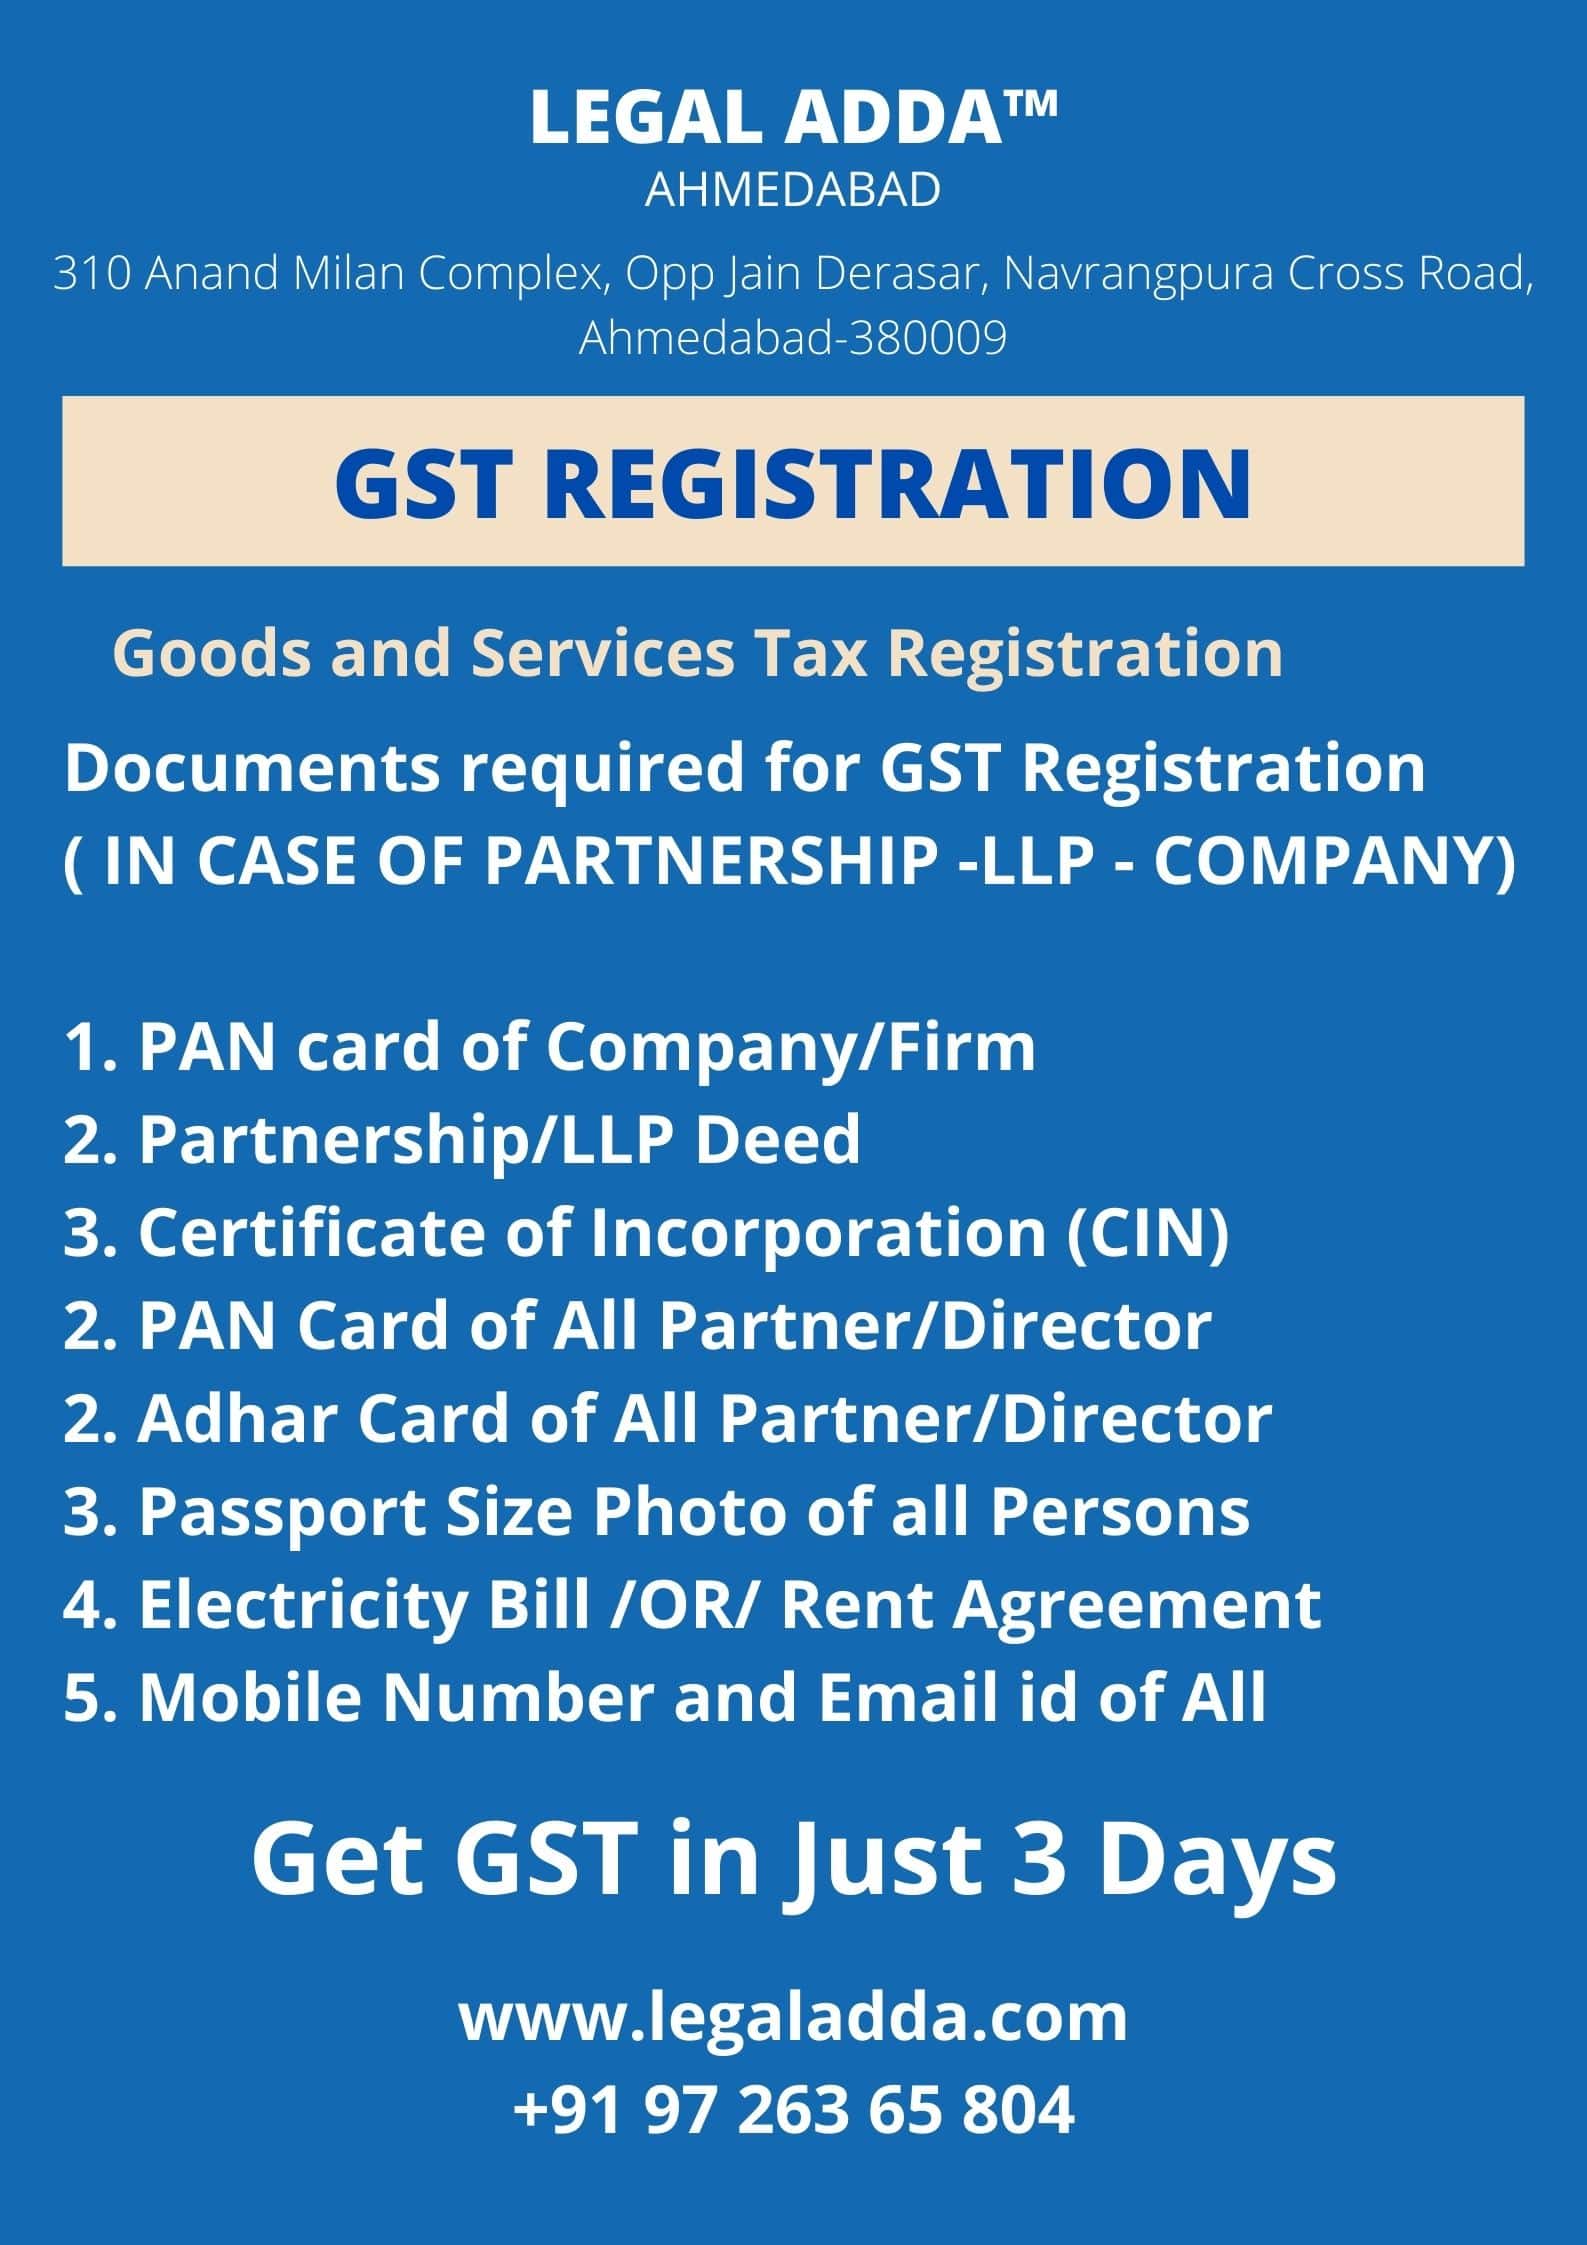 gst-registration-consultant-in-ahmedabad-get-gst-no-in-3-days